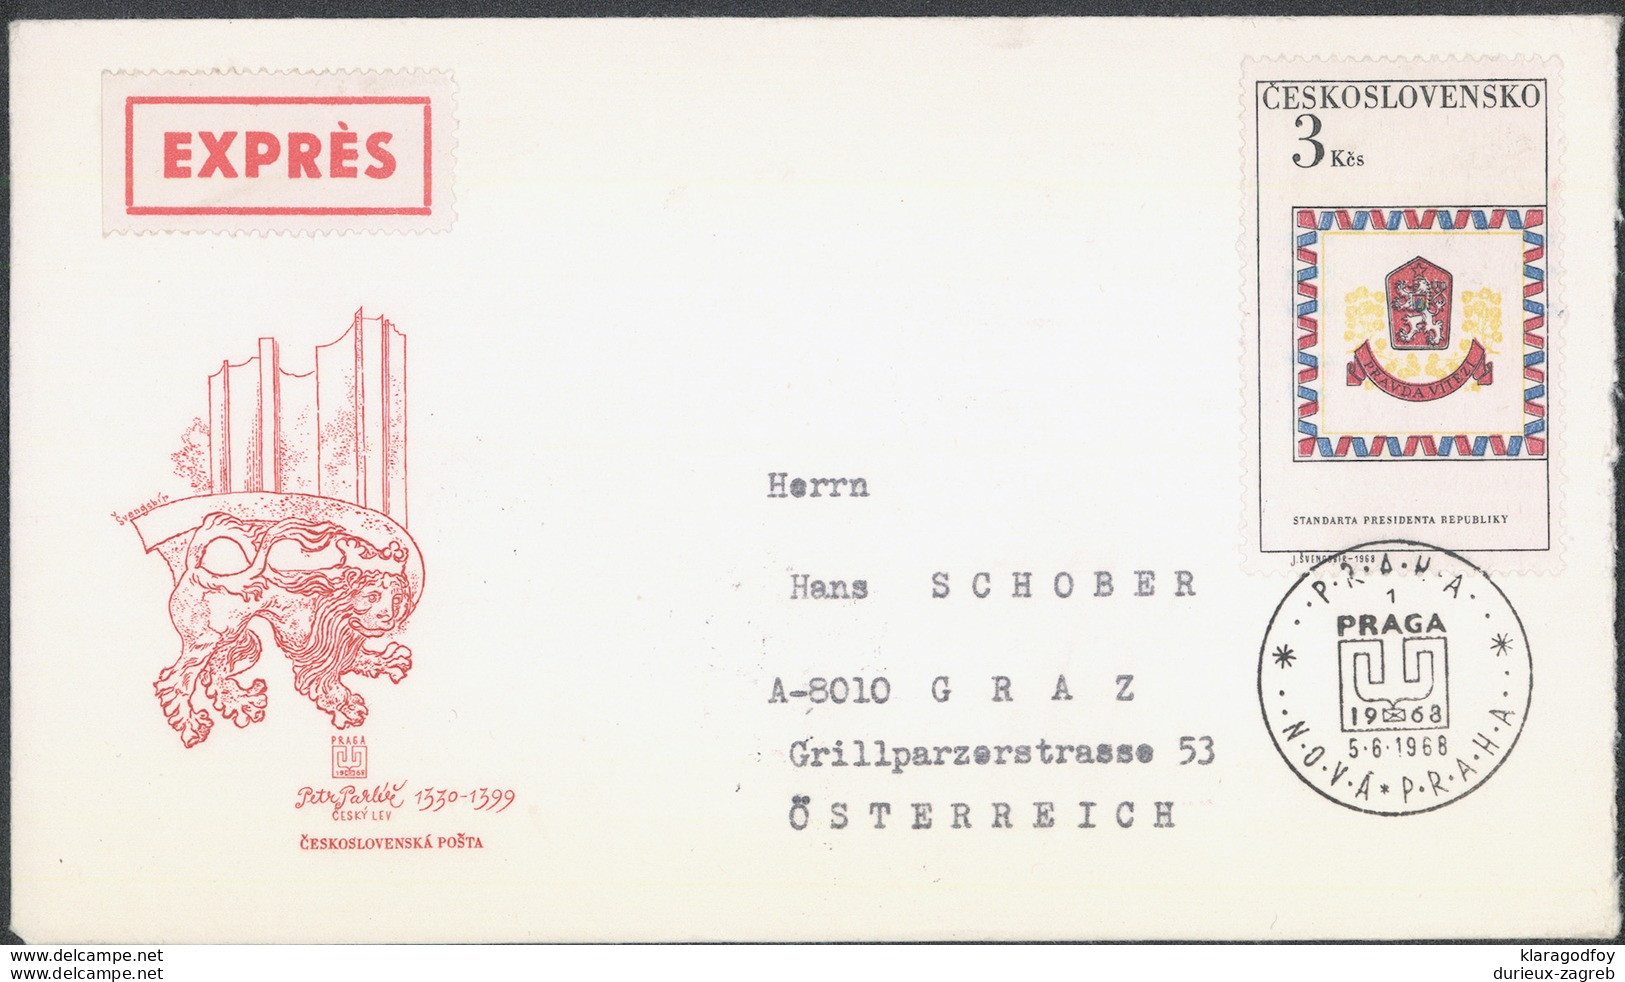 Czechoslovakia, Petr Parlé&#x159; Illustrated Letter Cover Express Travelled 1968 Karlovy Vary To Graz B170410 - Lettres & Documents